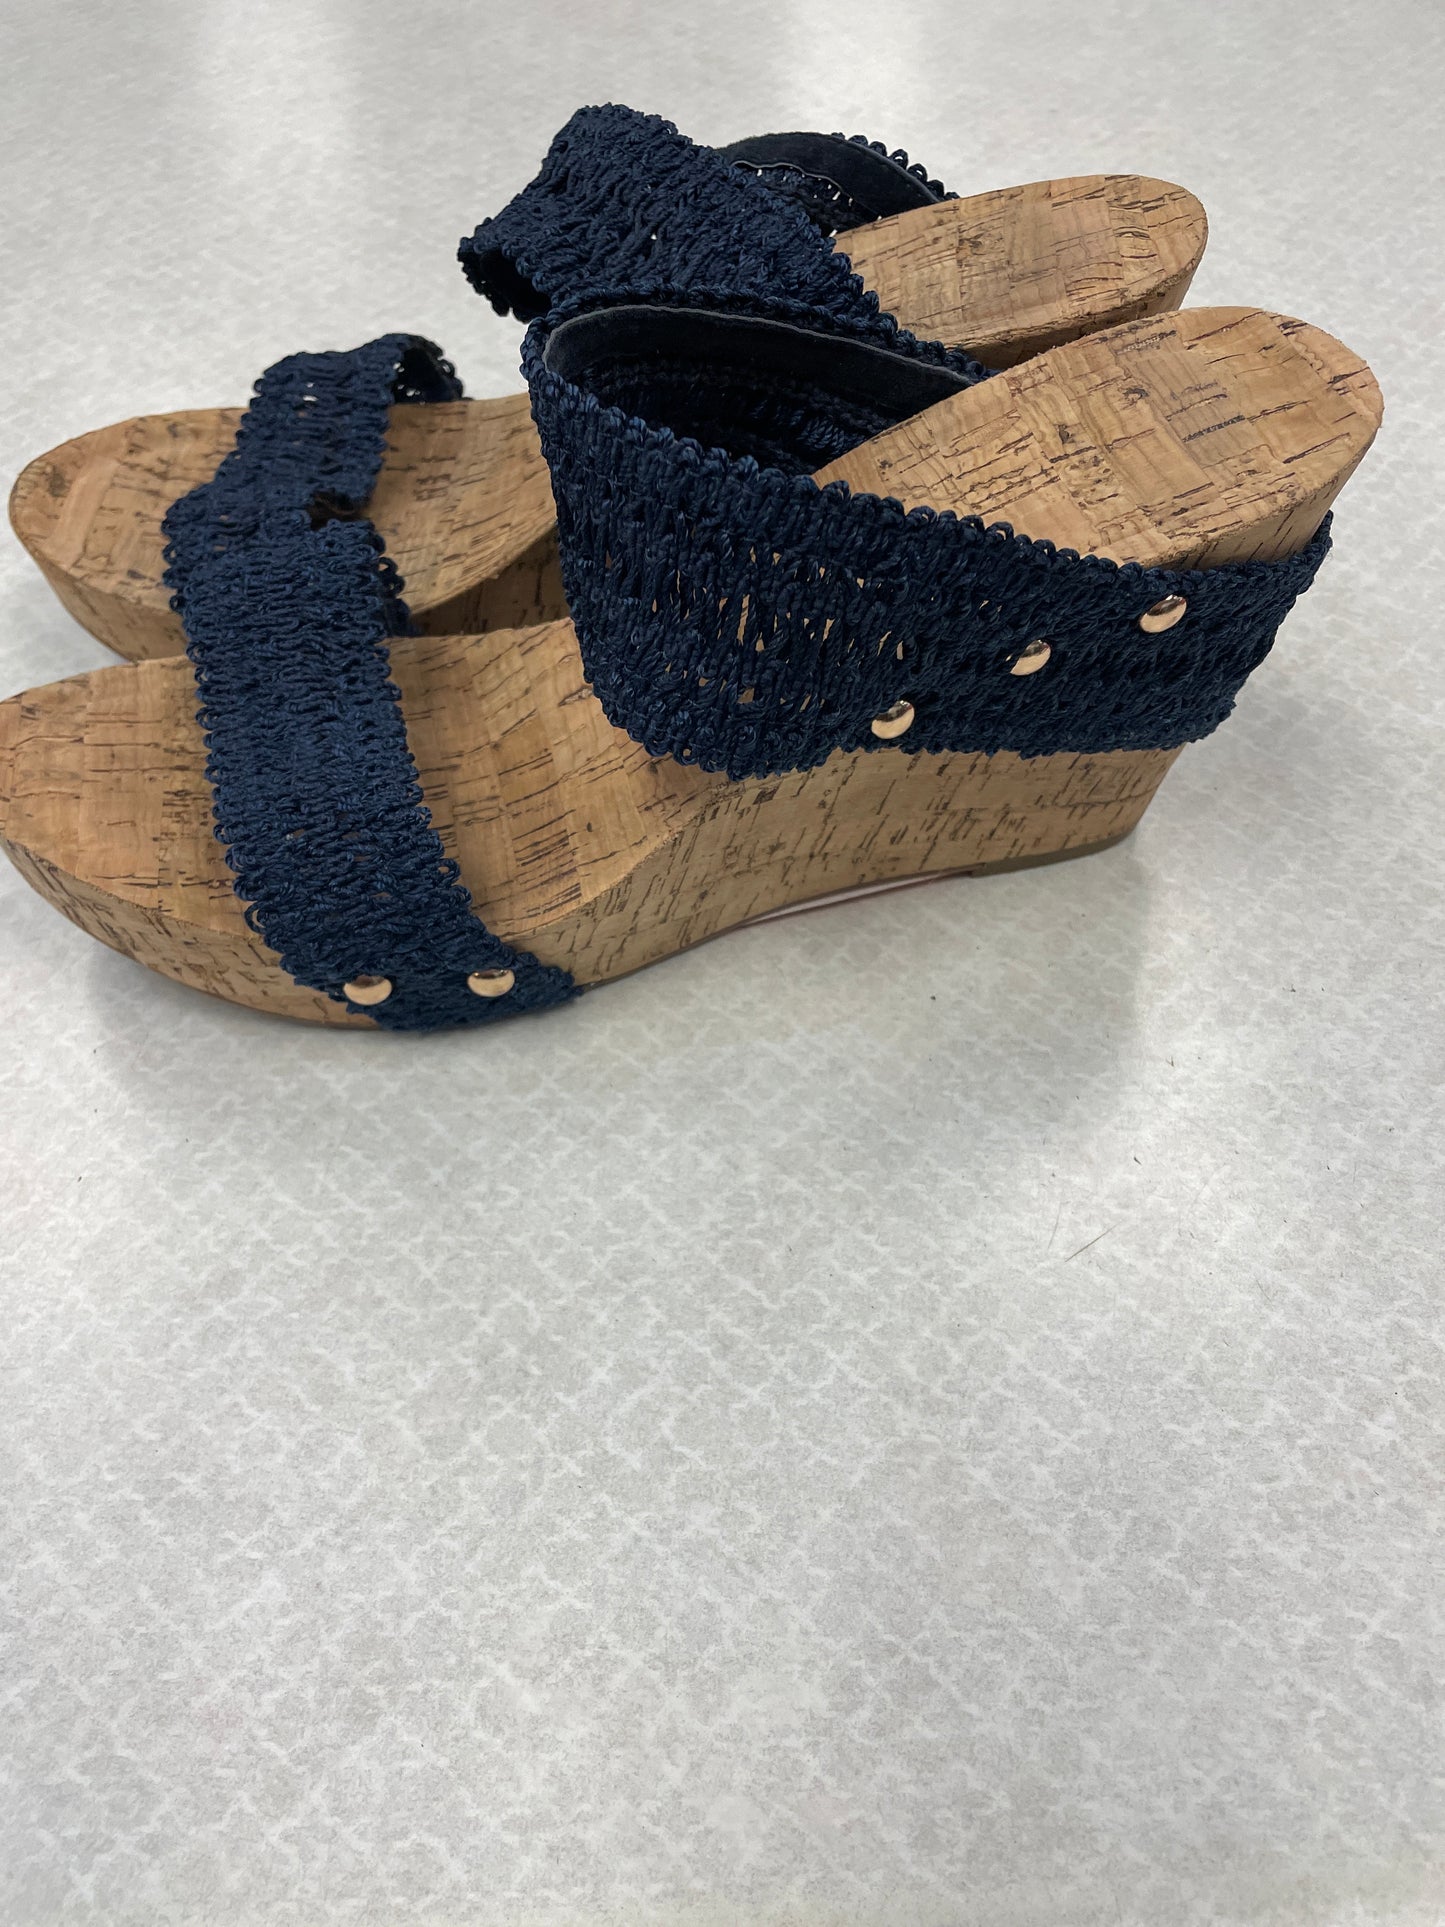 Sandals Heels Wedge By Clothes Mentor  Size: 8.5